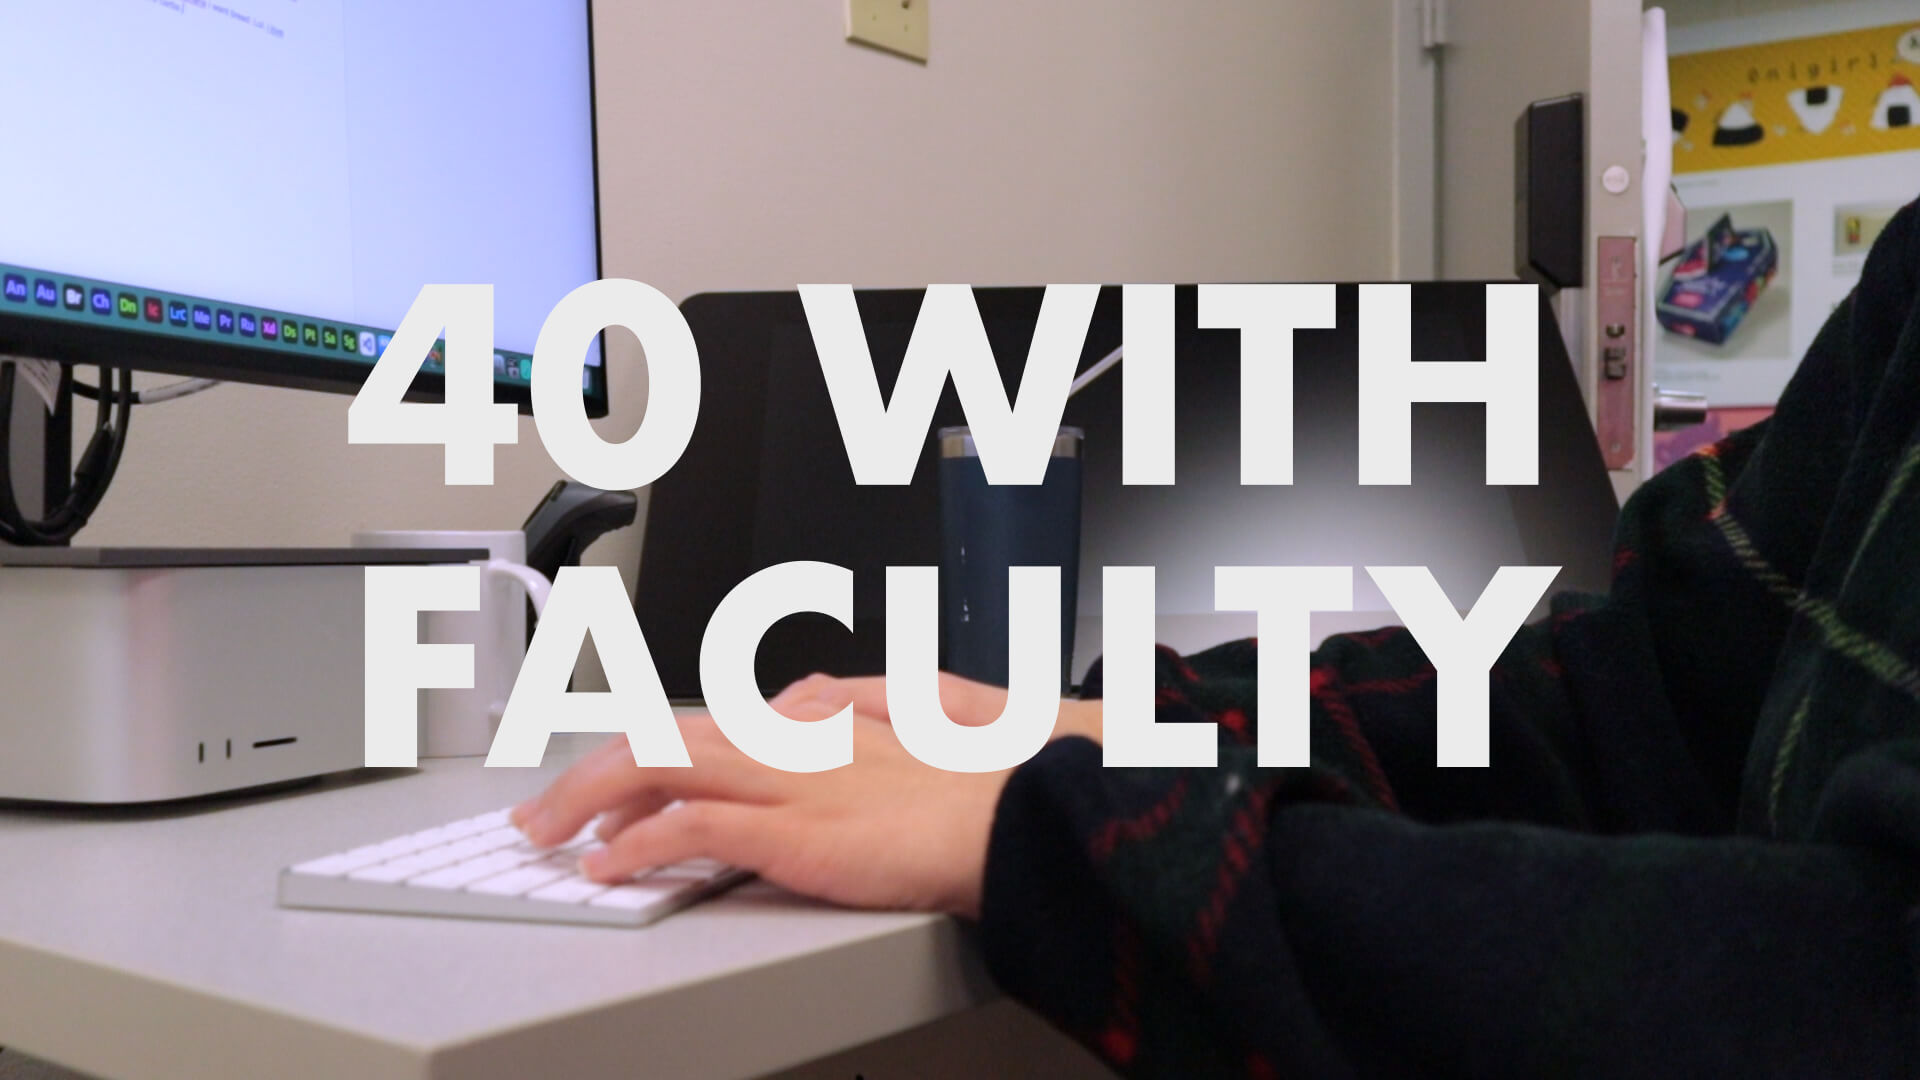 40 with Faculty: Professor Hillock